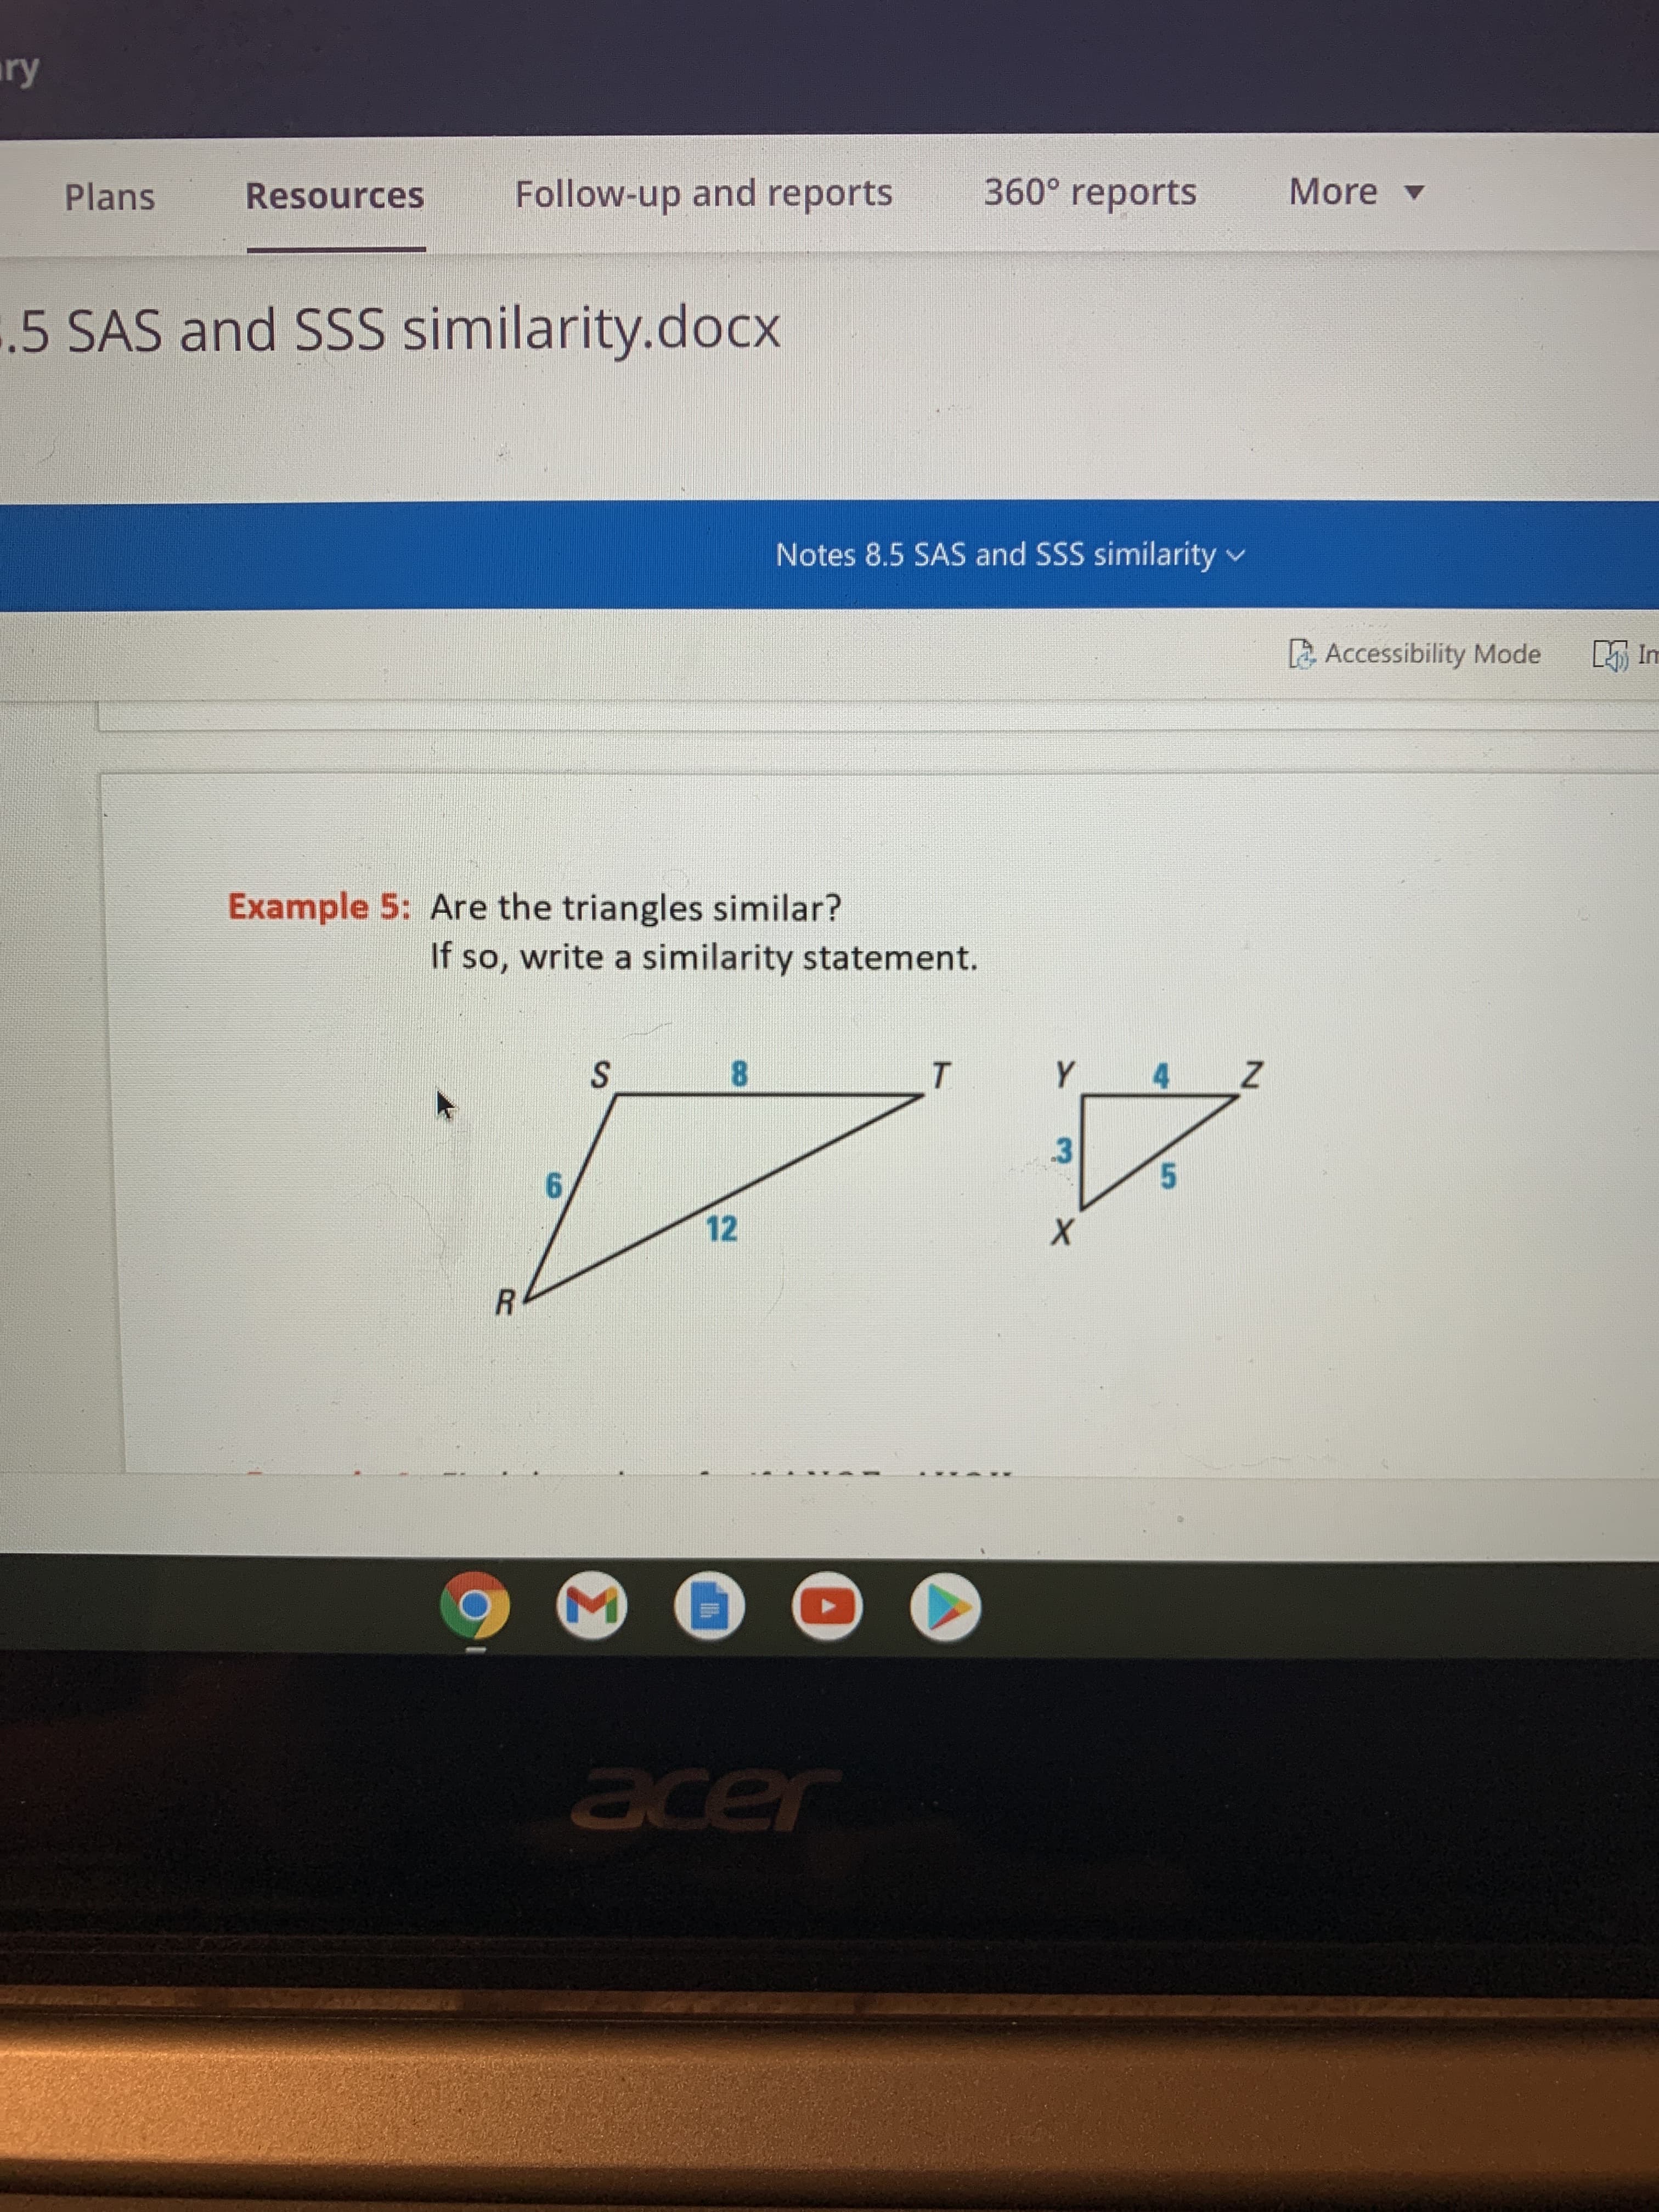 ry
Plans
Resources
Follow-up and reports
360° reports
More v
.5 SAS and SSS similarity.docx
Notes 8.5 SAS and SSS similarity v
Accessibility Mode
Example 5: Are the triangles similar?
If so, write a similarity statement.
8.
3.
5.
6.
12
acer
